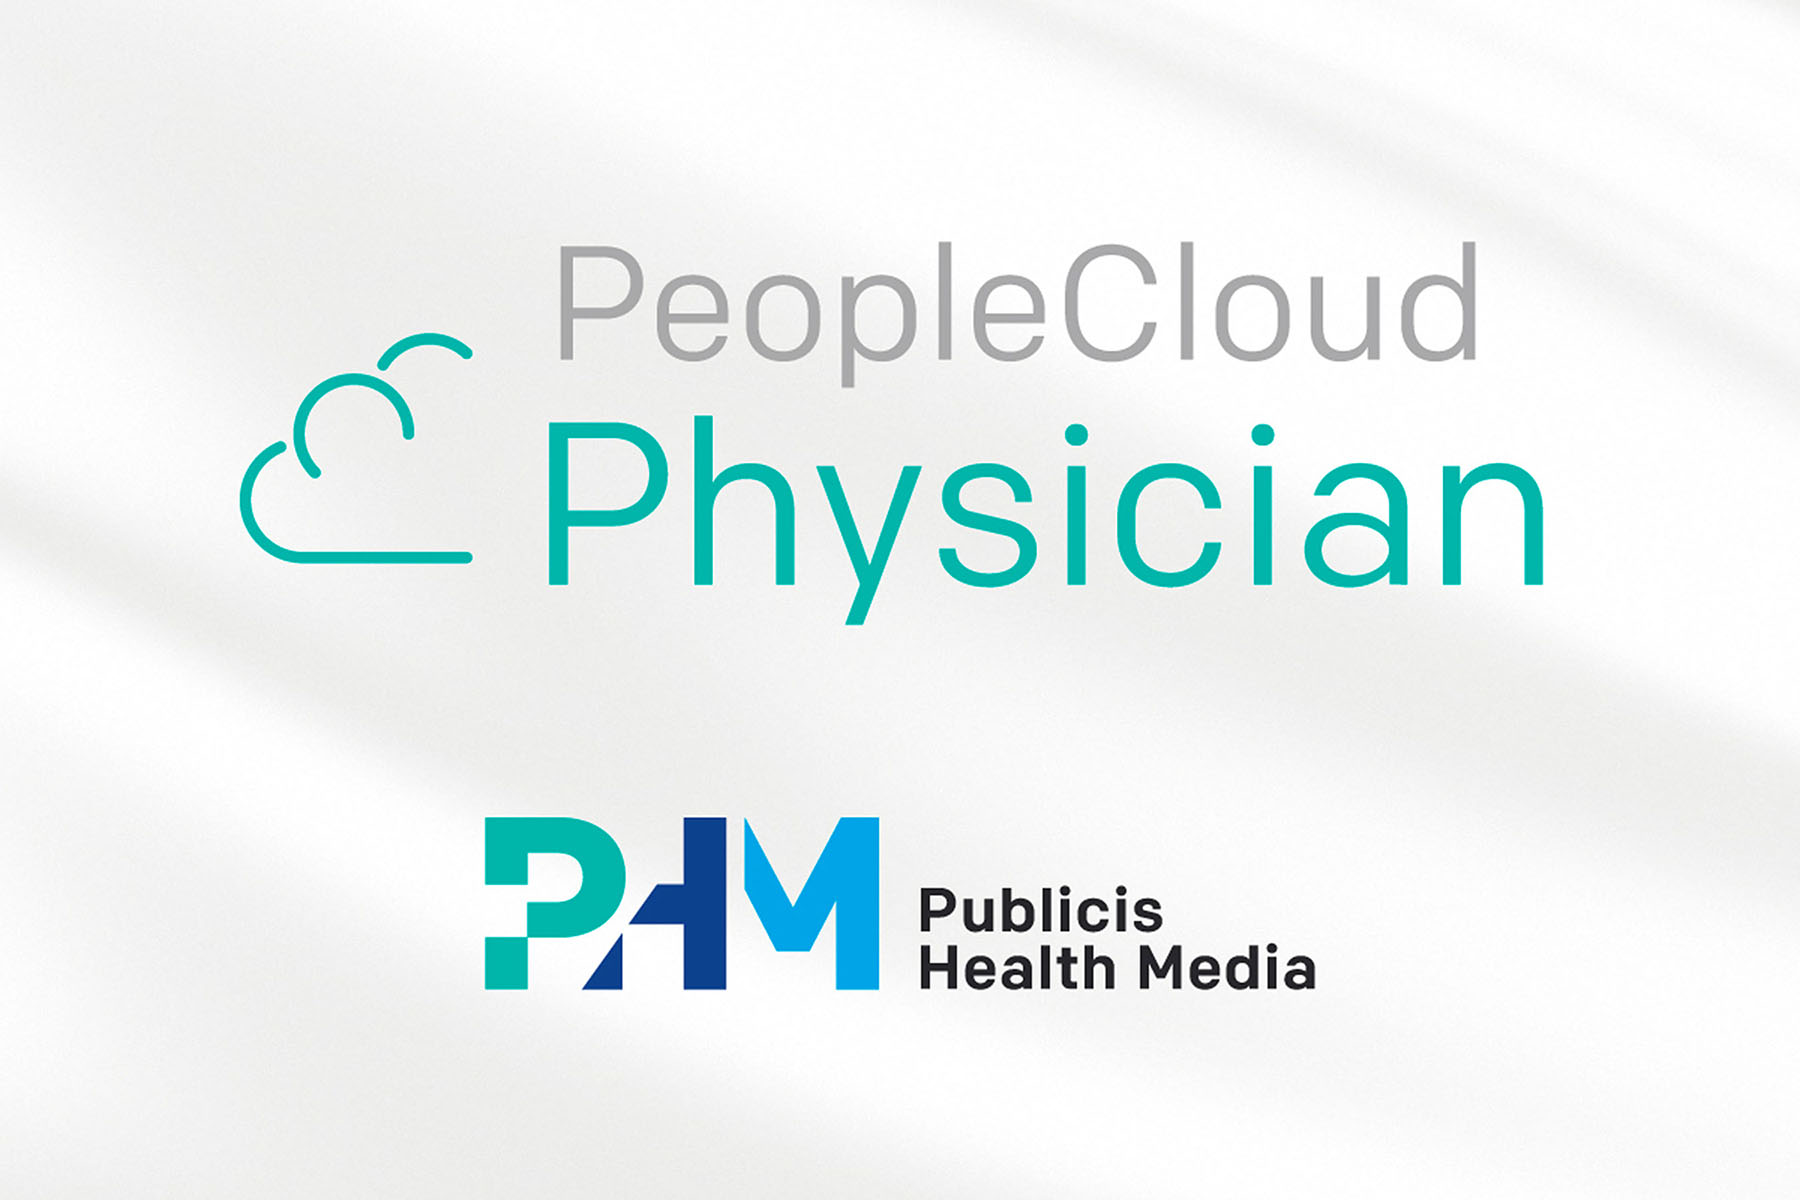 Logos for PeopleCloud Physician and Publicis Health Media